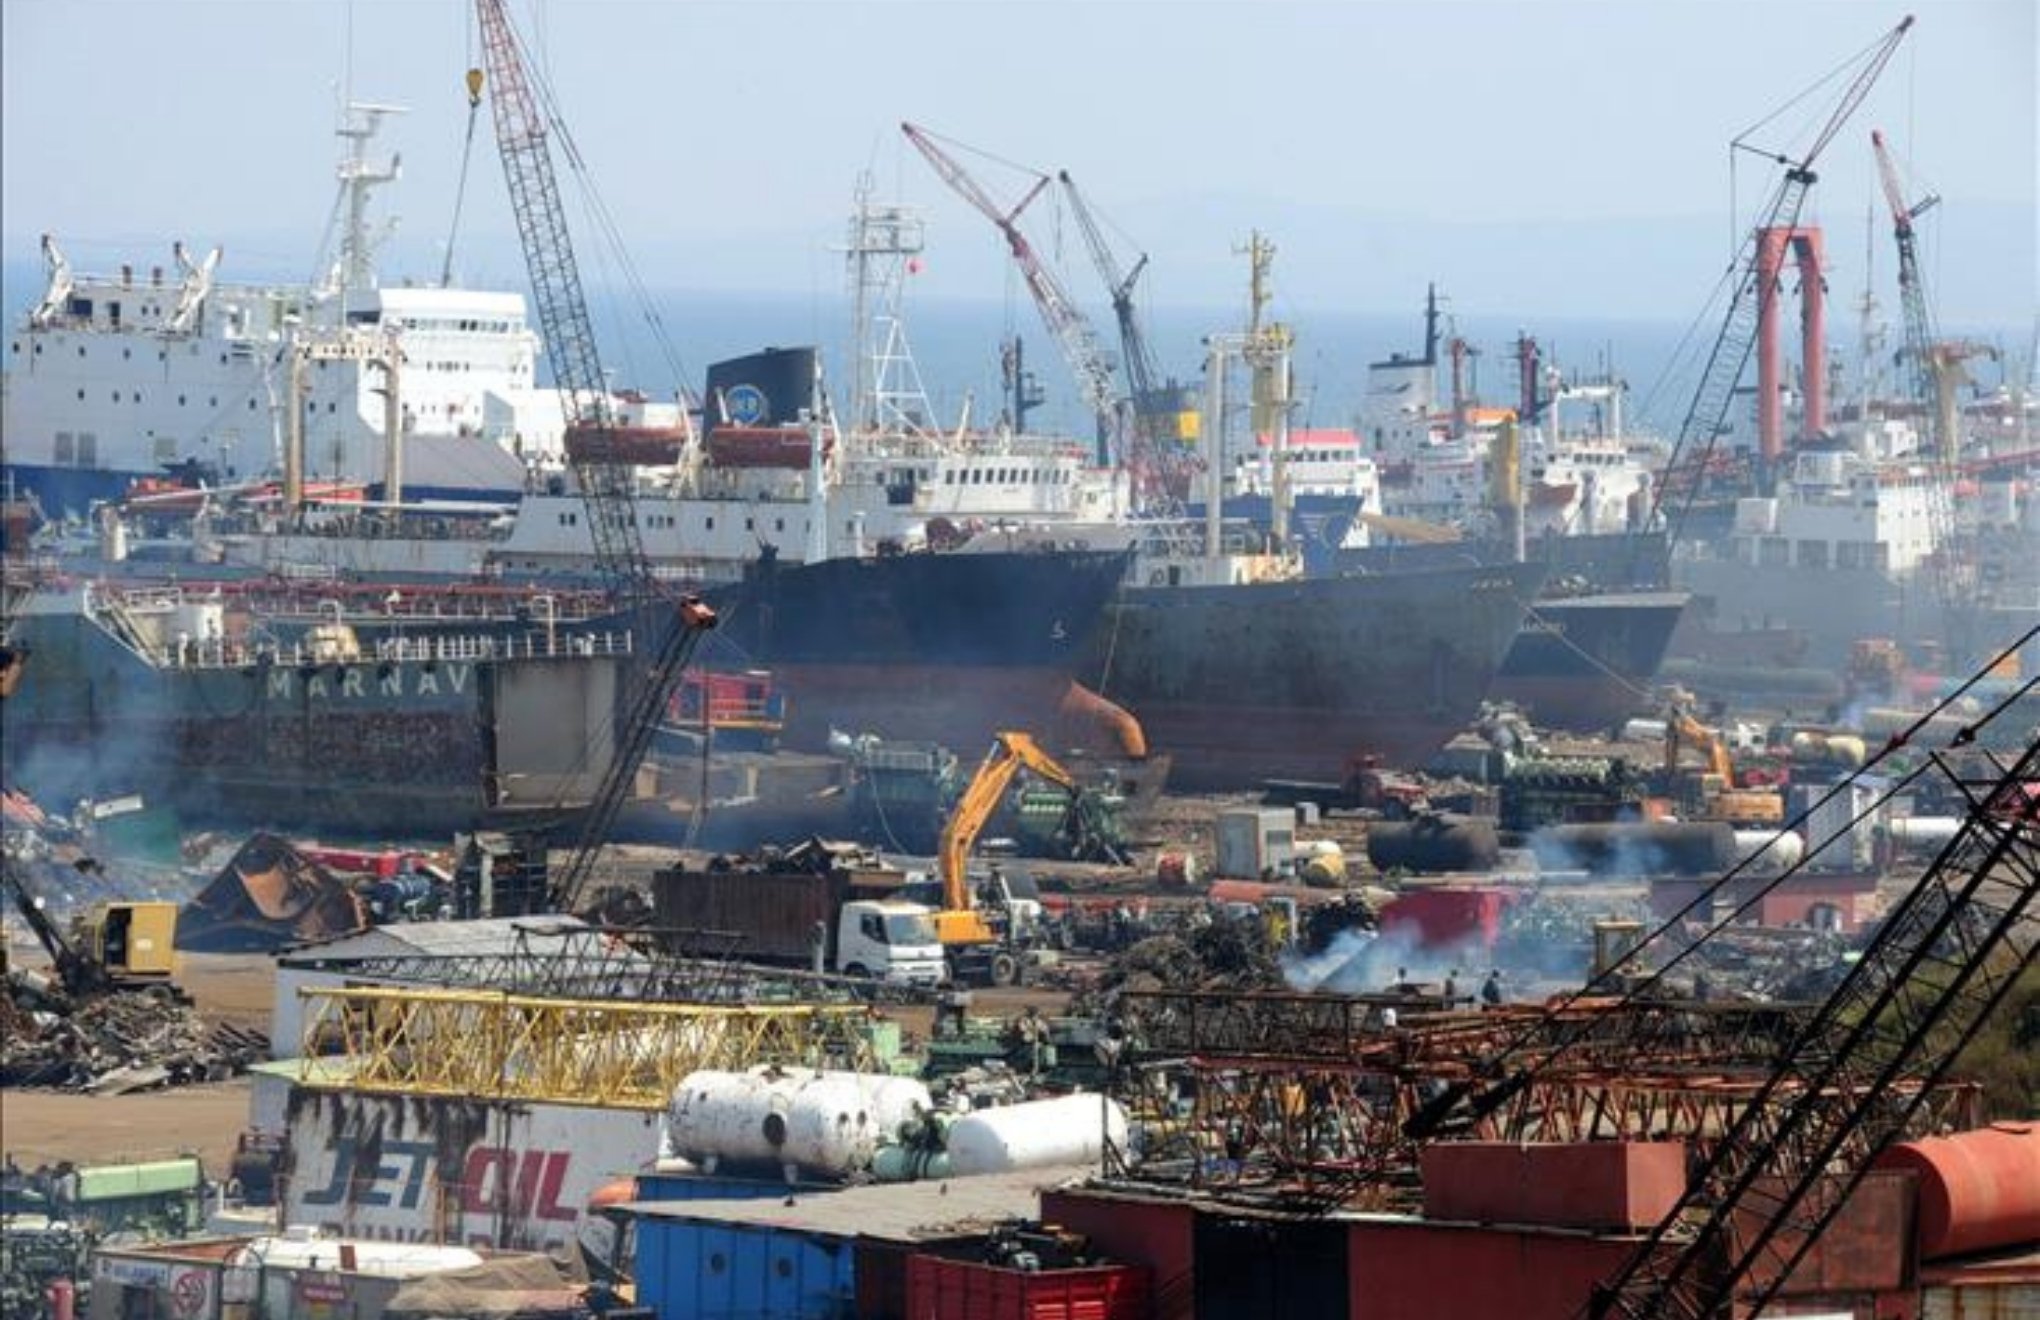 Occupational homicide claims two lives in shipbreaking facility